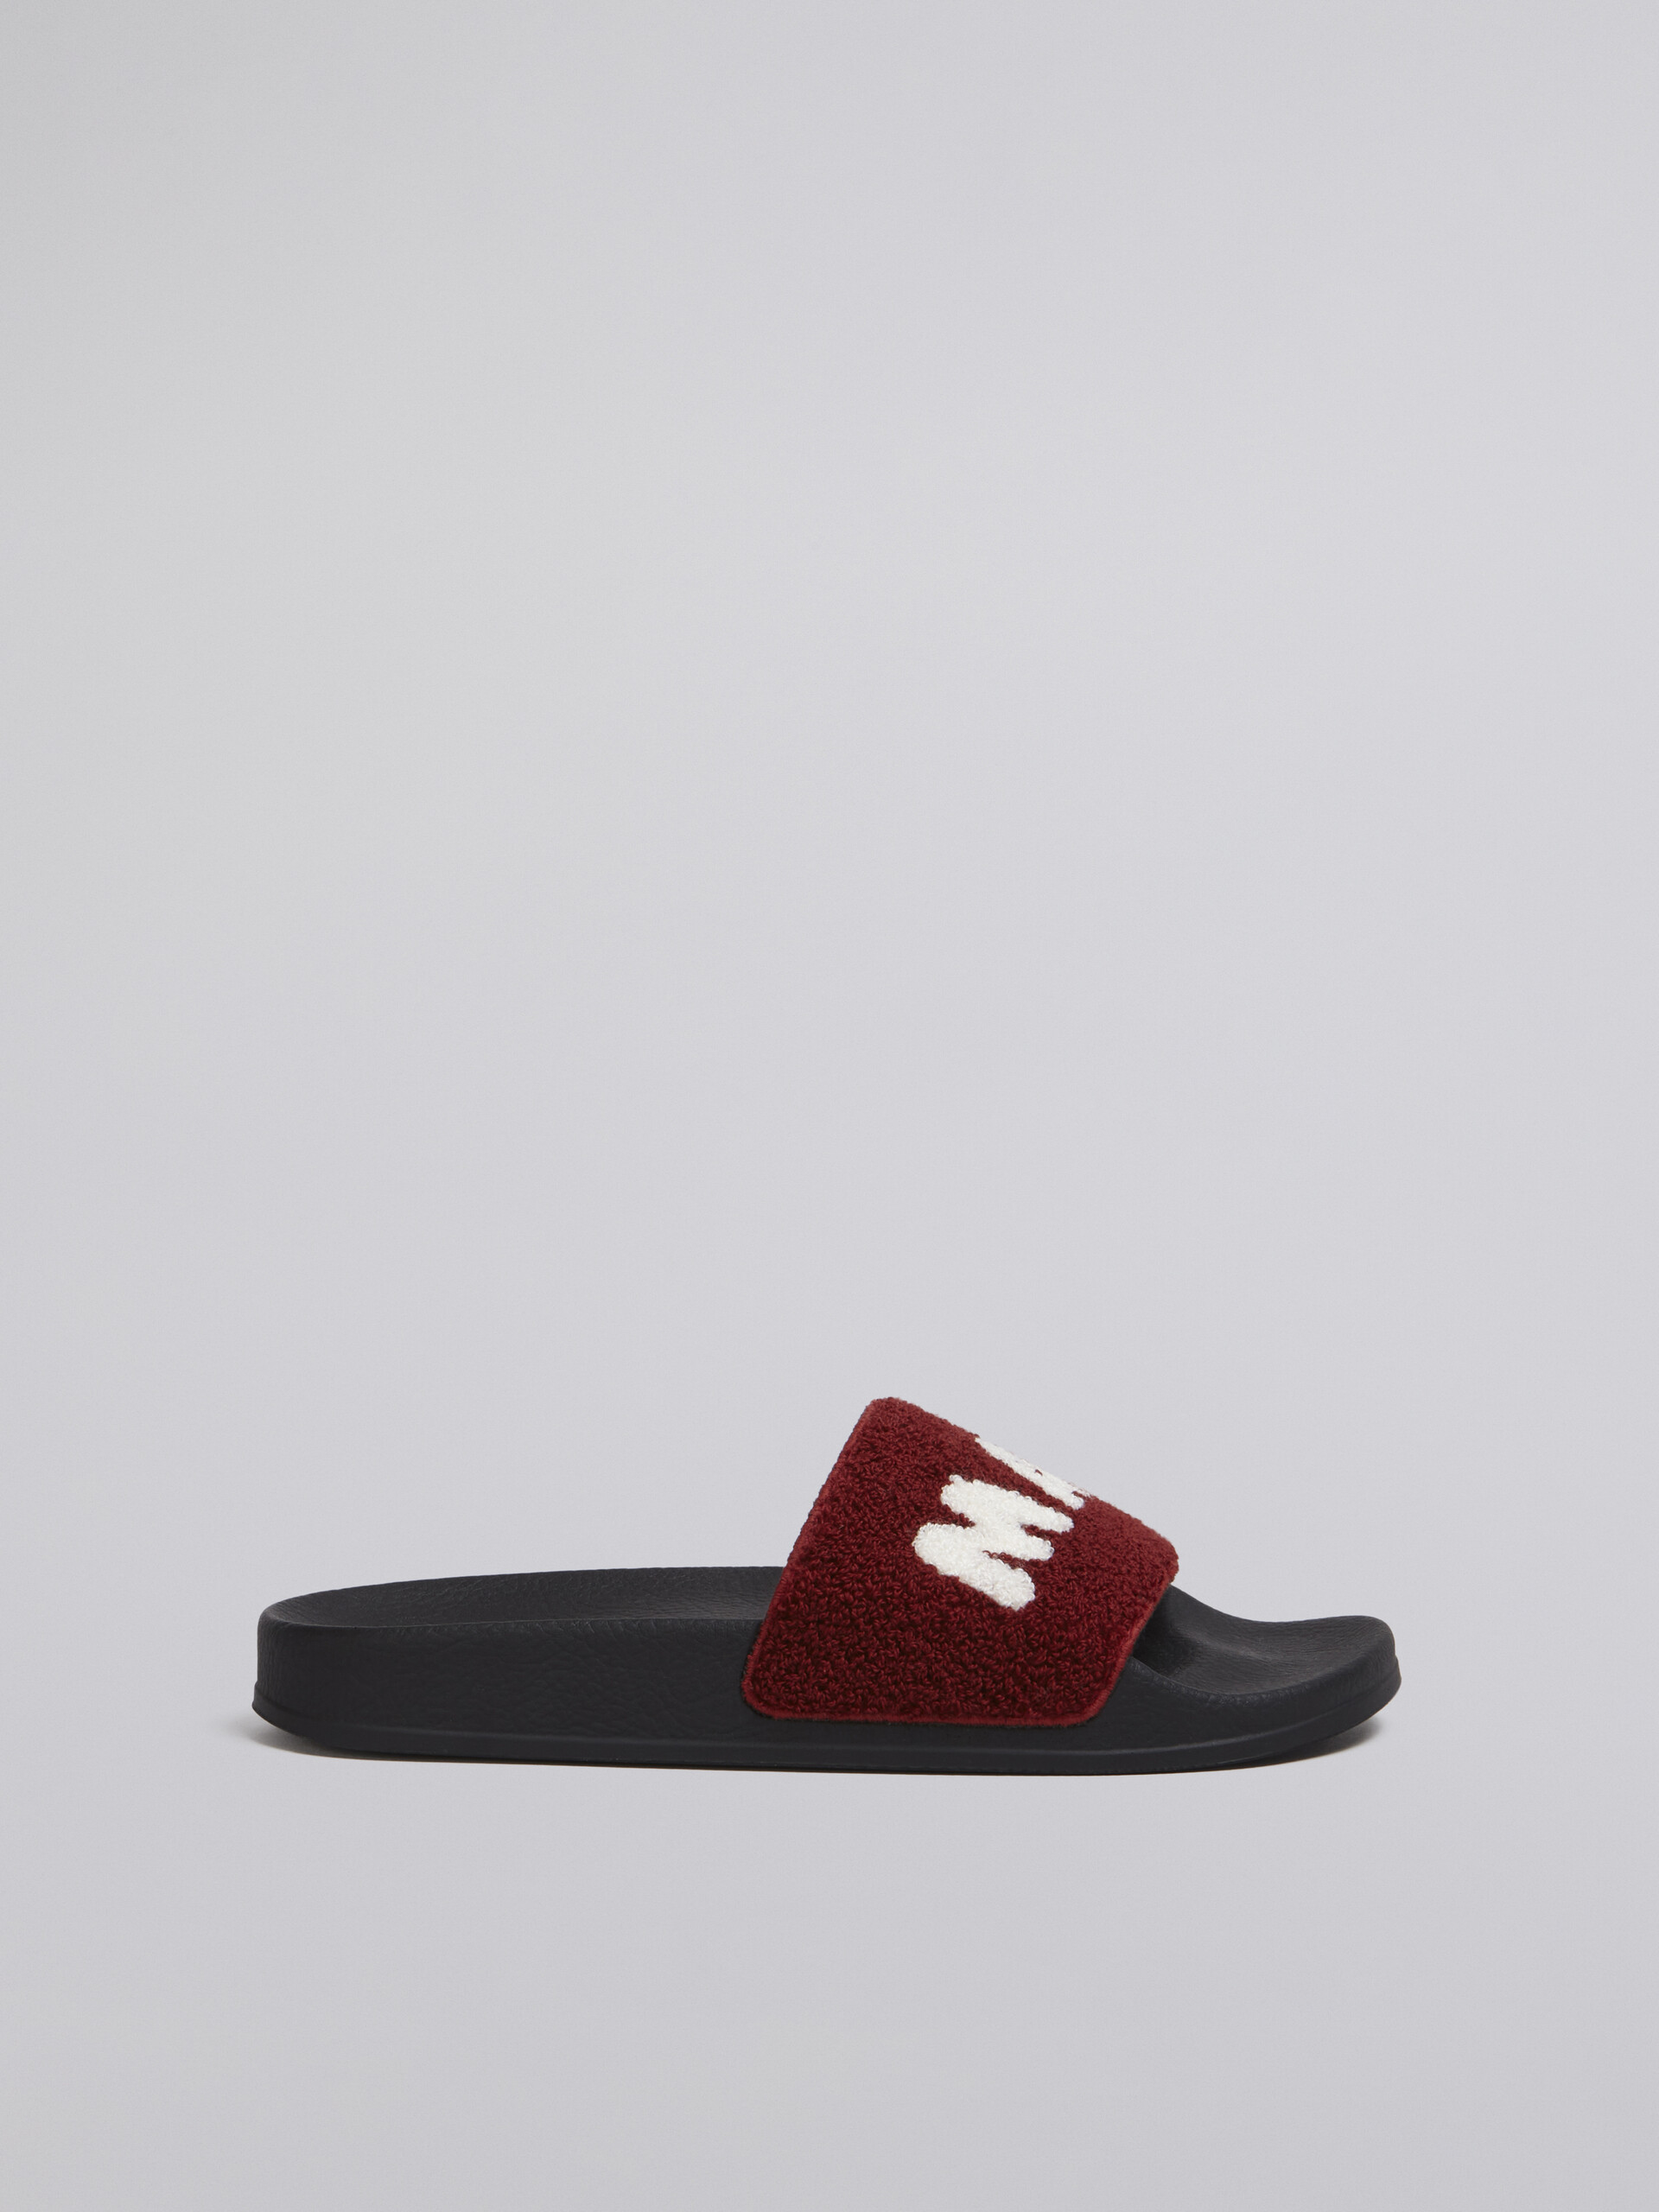 Rubber sandal with white and red terry-cloth band - Sandals - Image 1